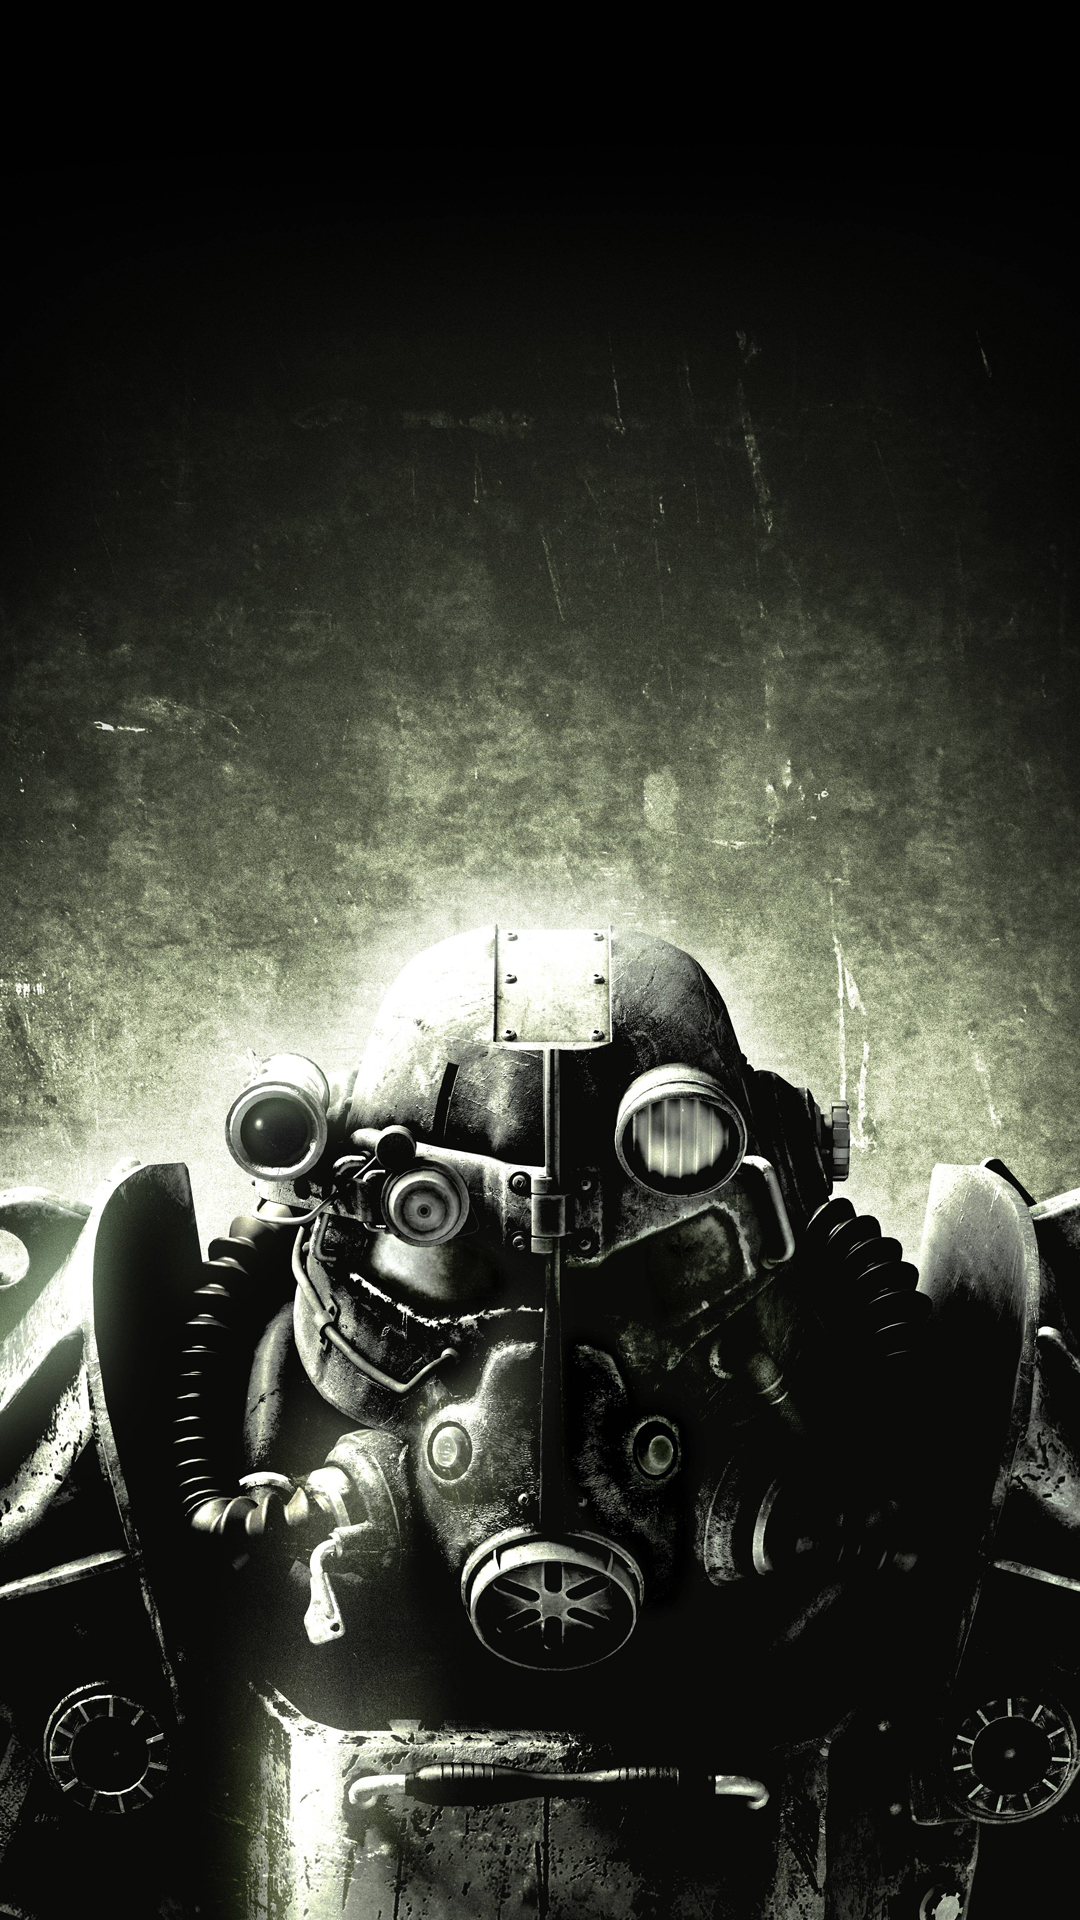 fallout 4 wallpaper,personal protective equipment,photography,black and white,gas mask,headgear